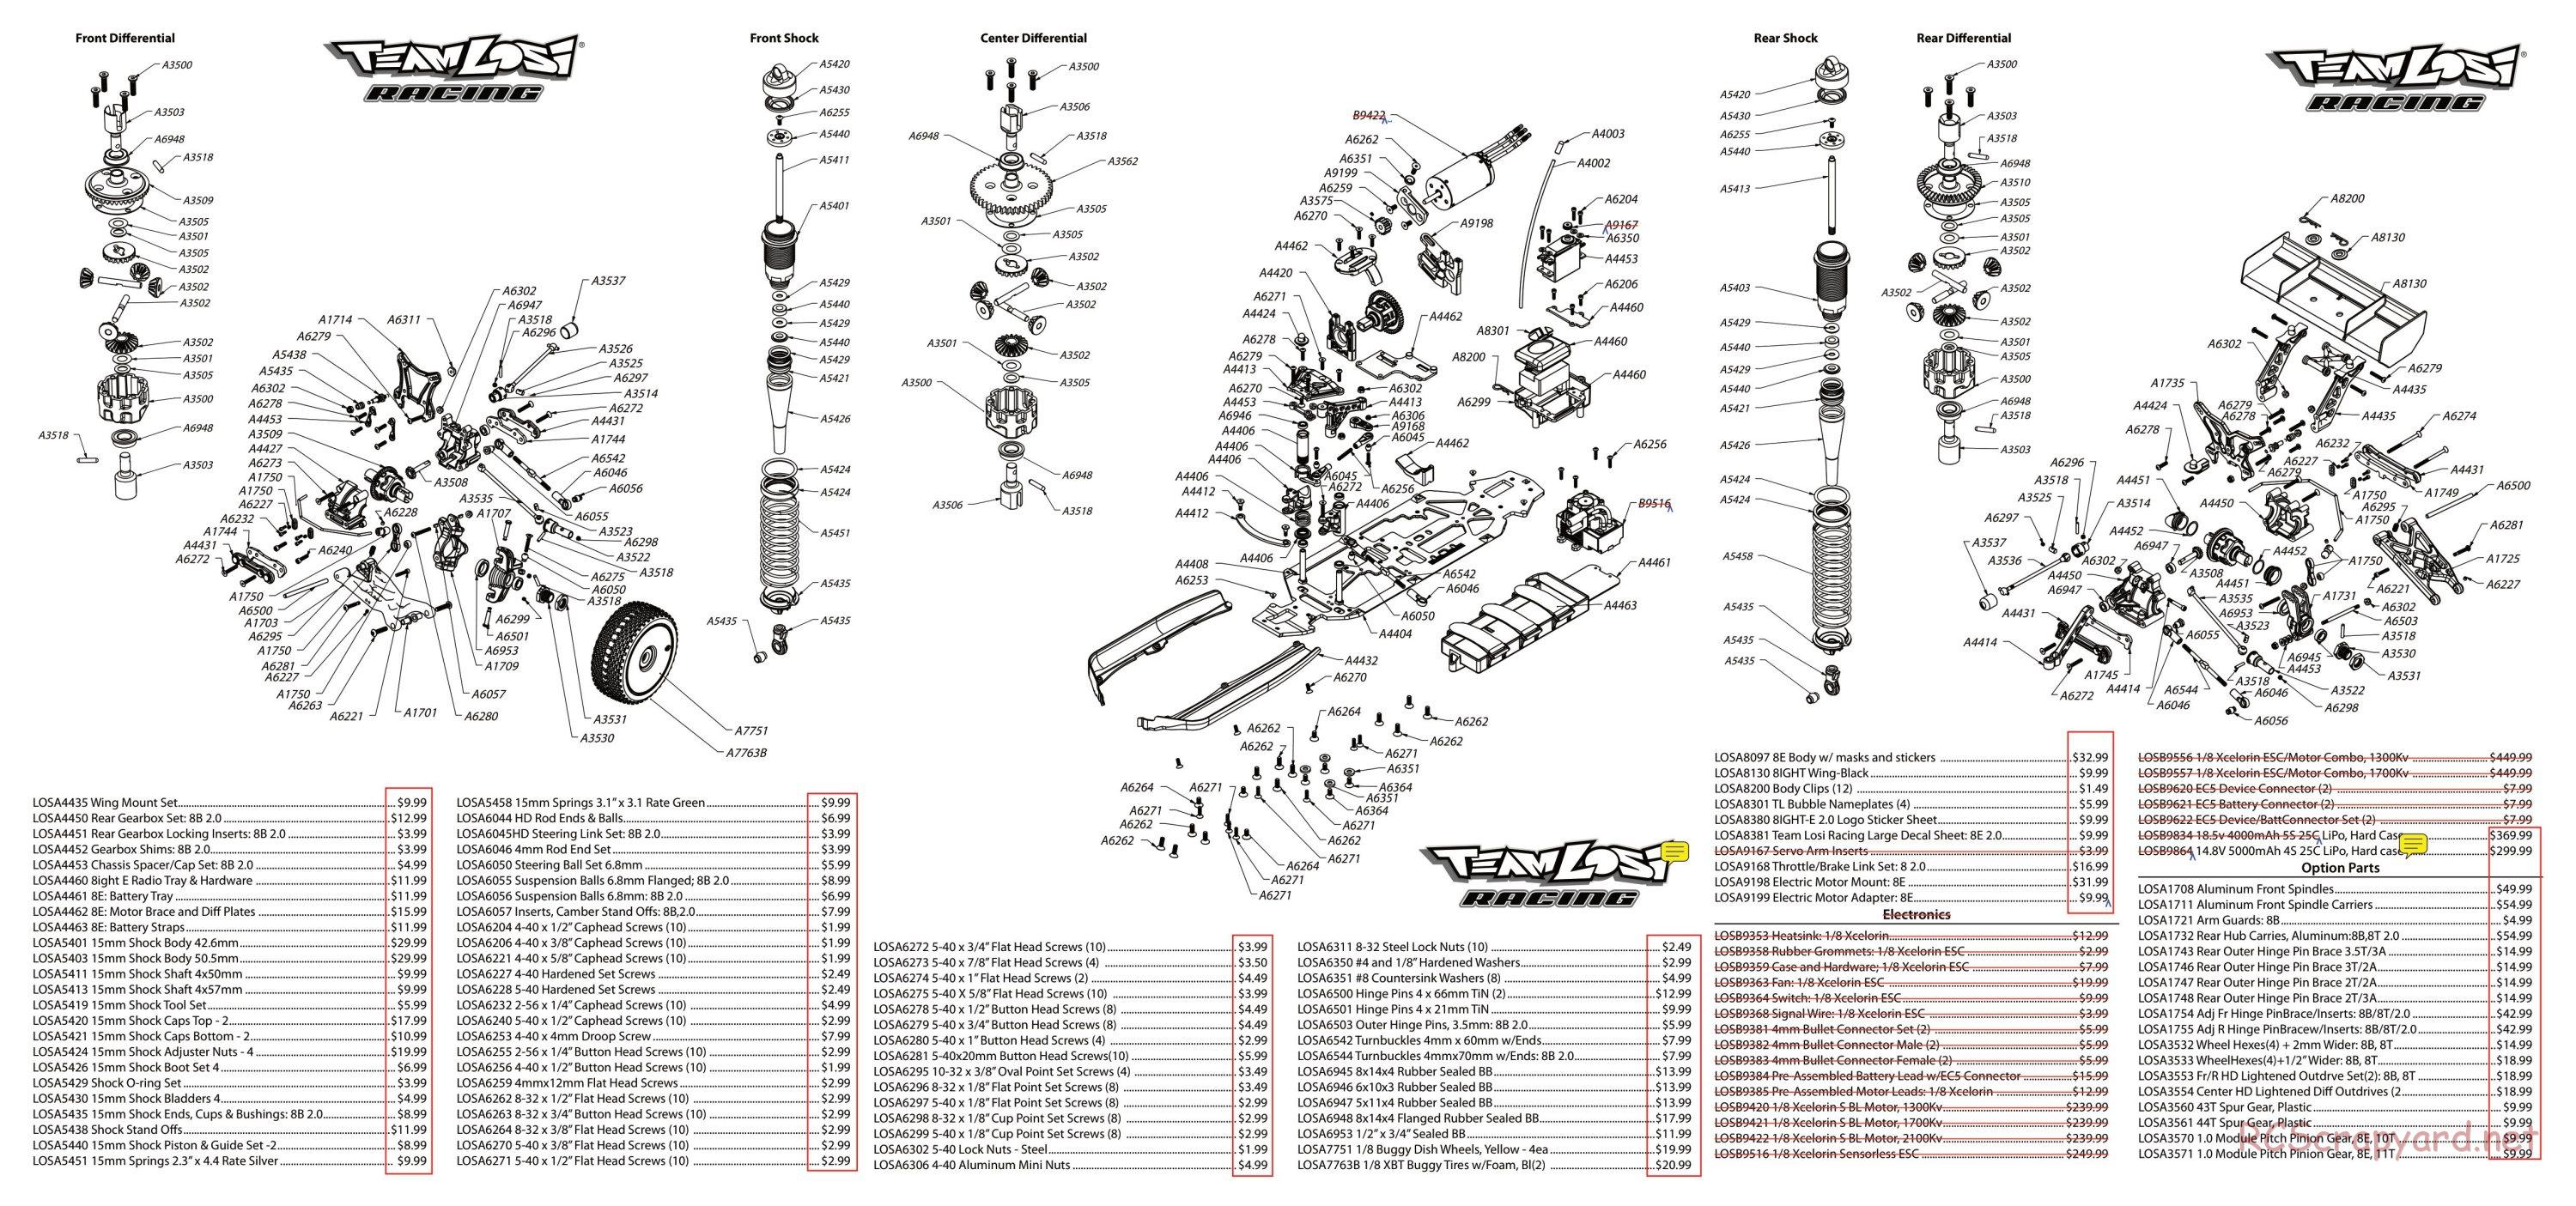 Team Losi - 8ight-E 2.0 Race Roller - Parts List and Exploded View - Page 1